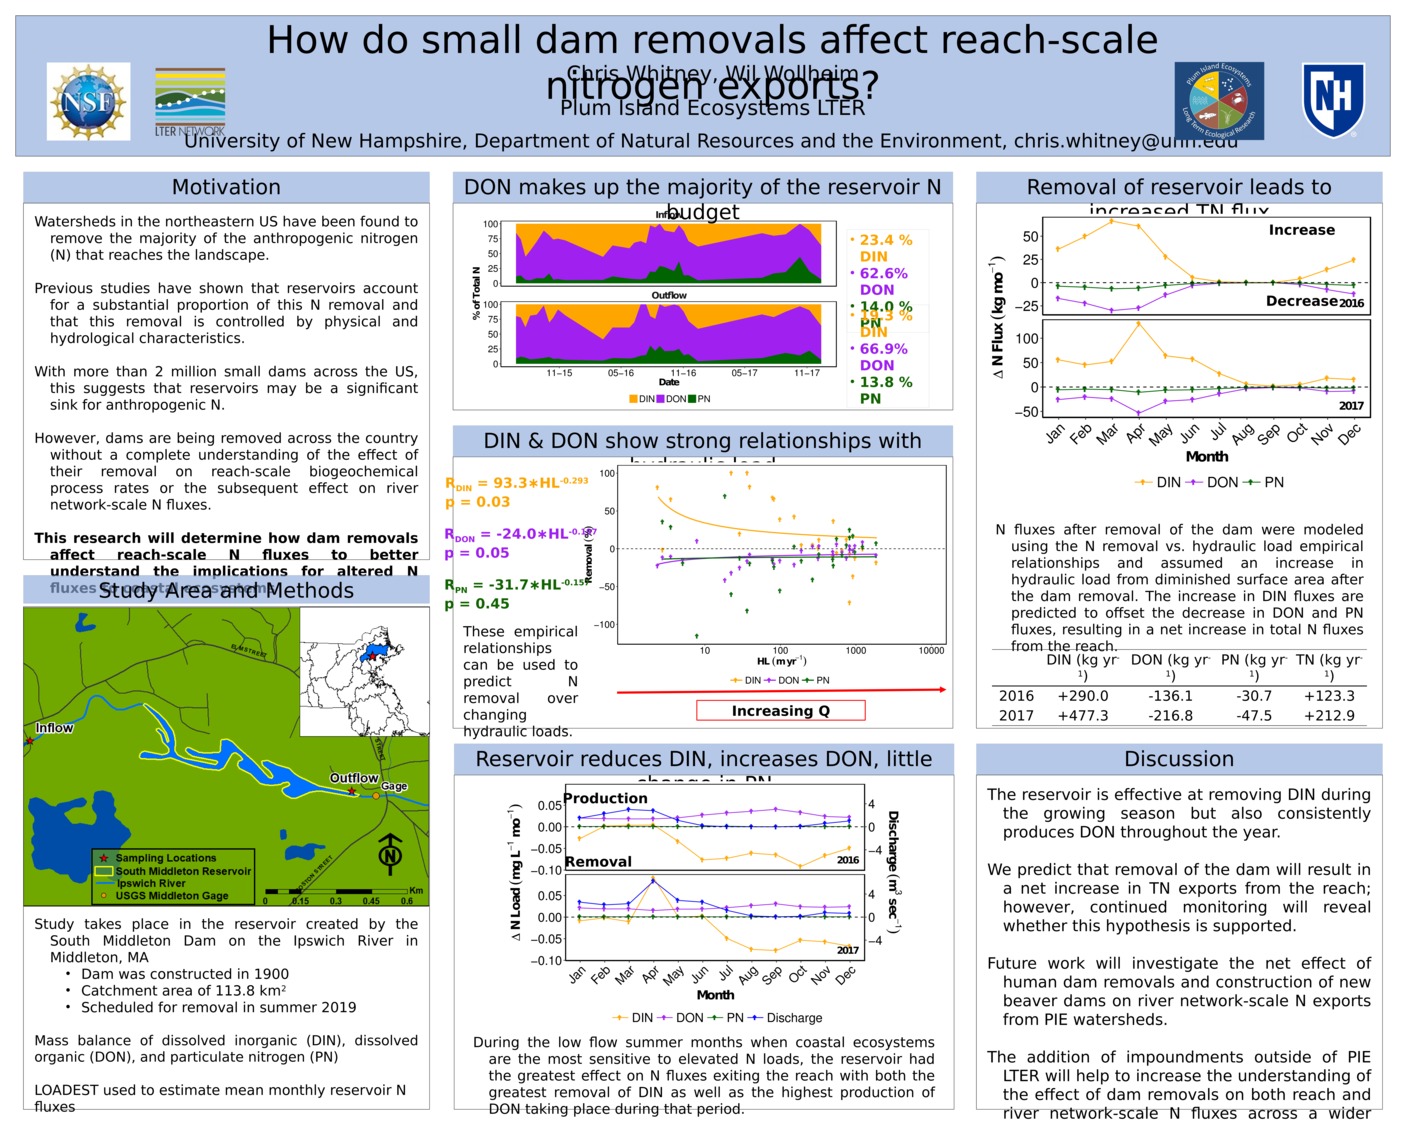 How Do Small Dam Removals Affect Reach-Scale Nitrogen Exports? by ctw1